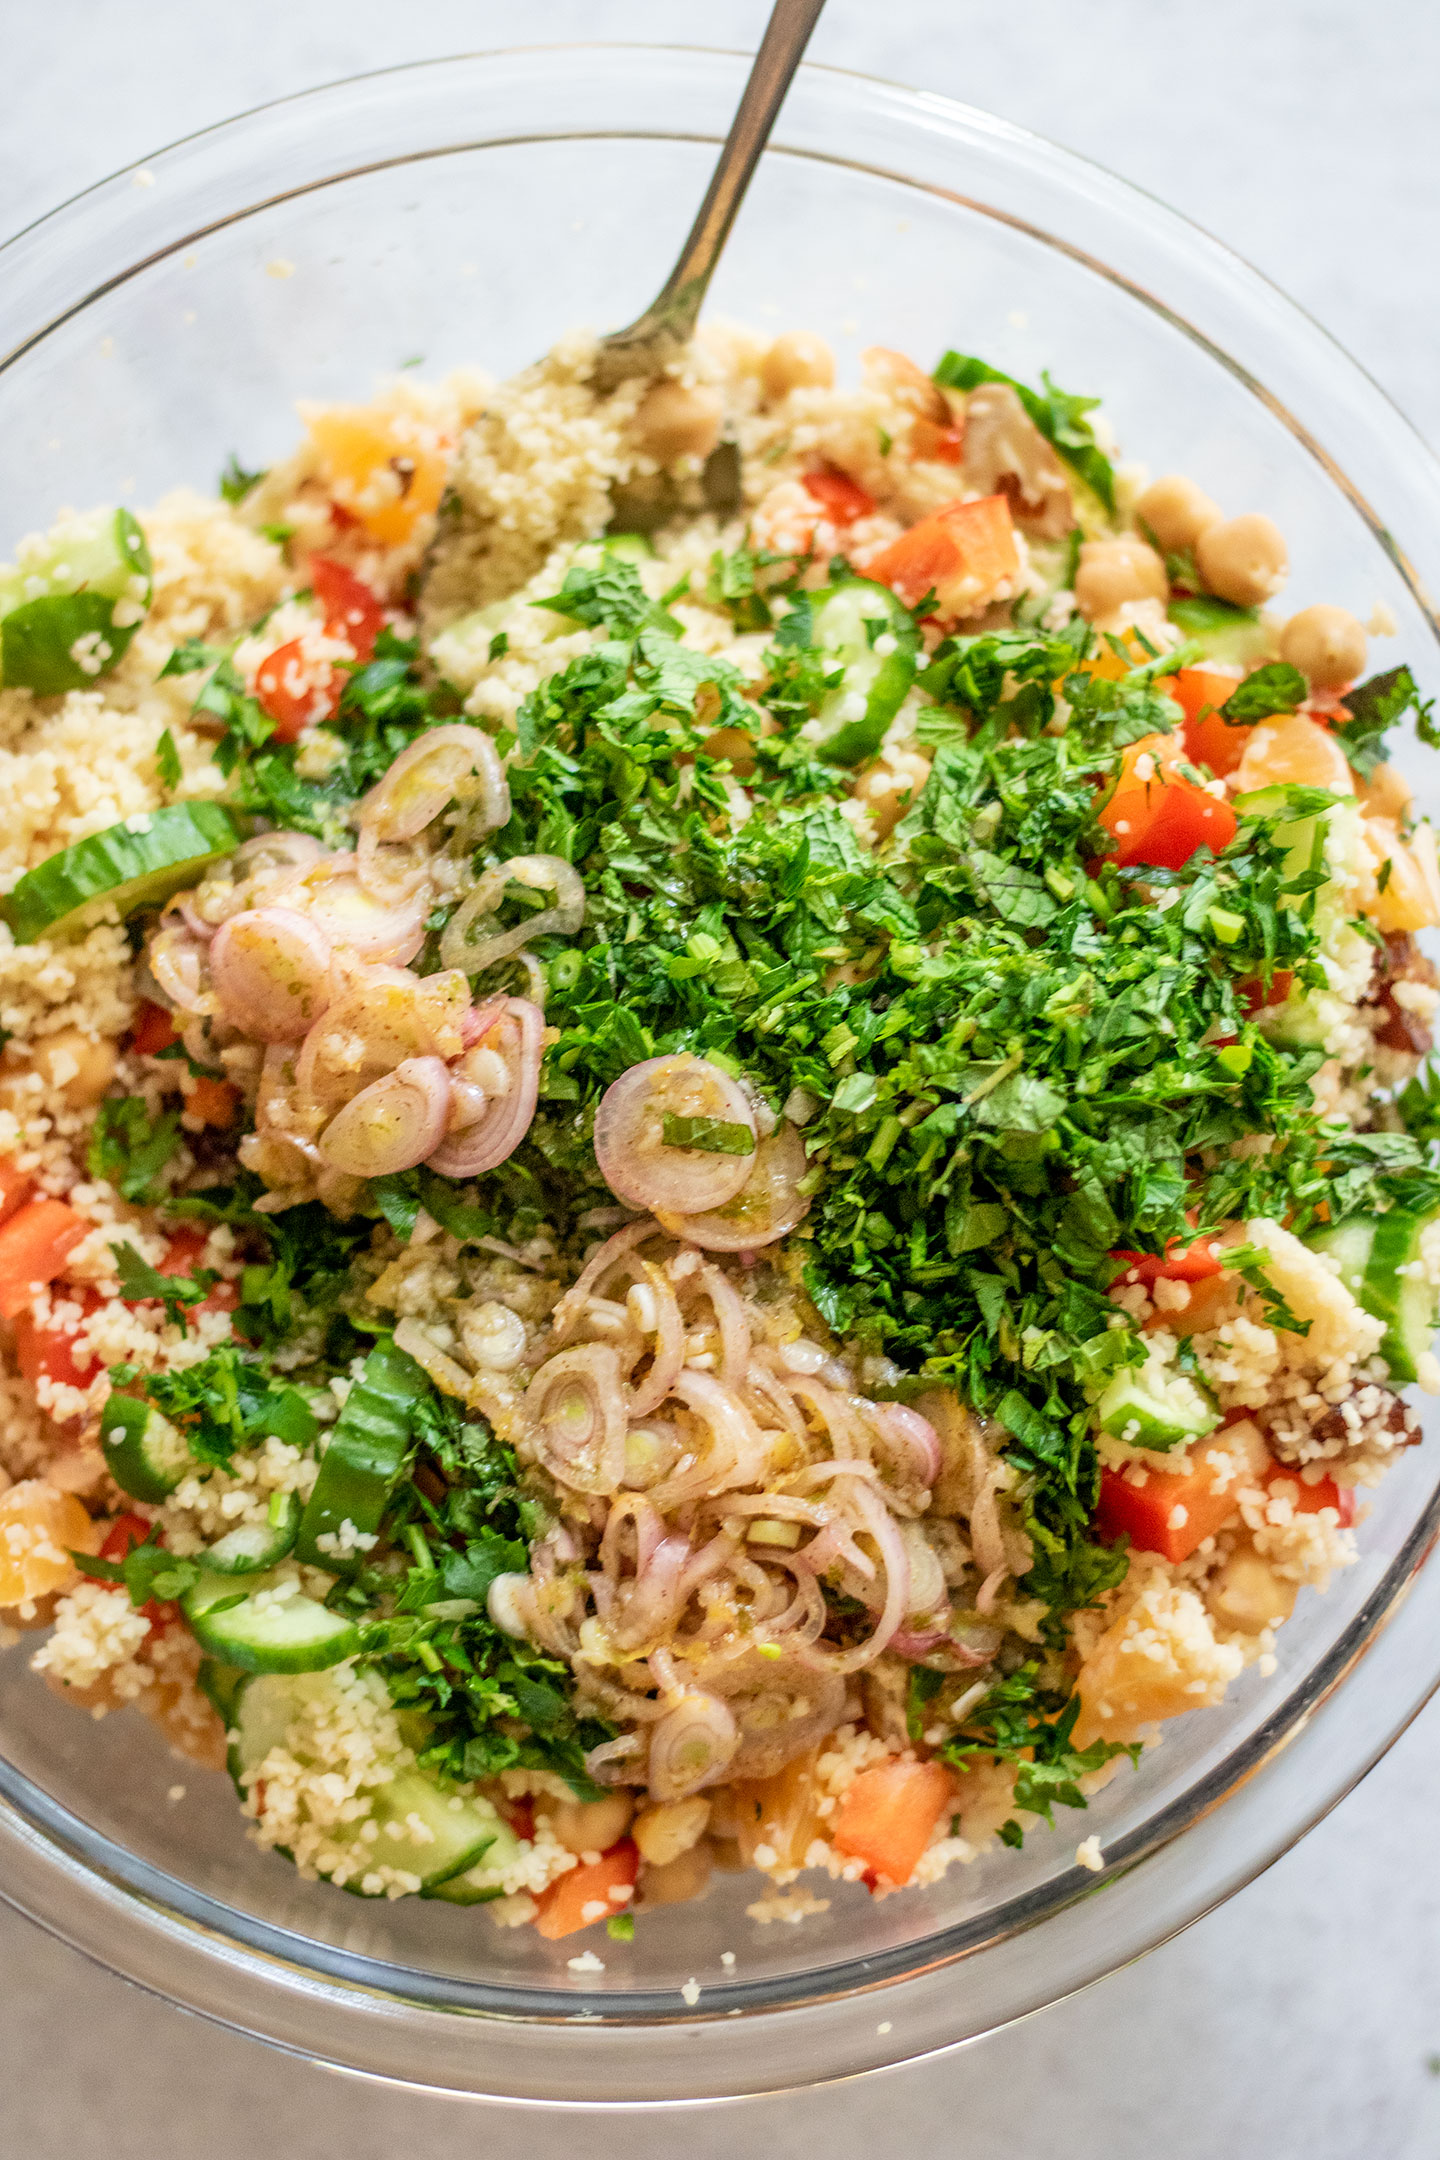 Giant bowl of mixed couscous topped with chopped peppers, cucumbers, chickpeas, dried fruit, oranges, and fresh herbs and dressing in a large glass mixing bowl.